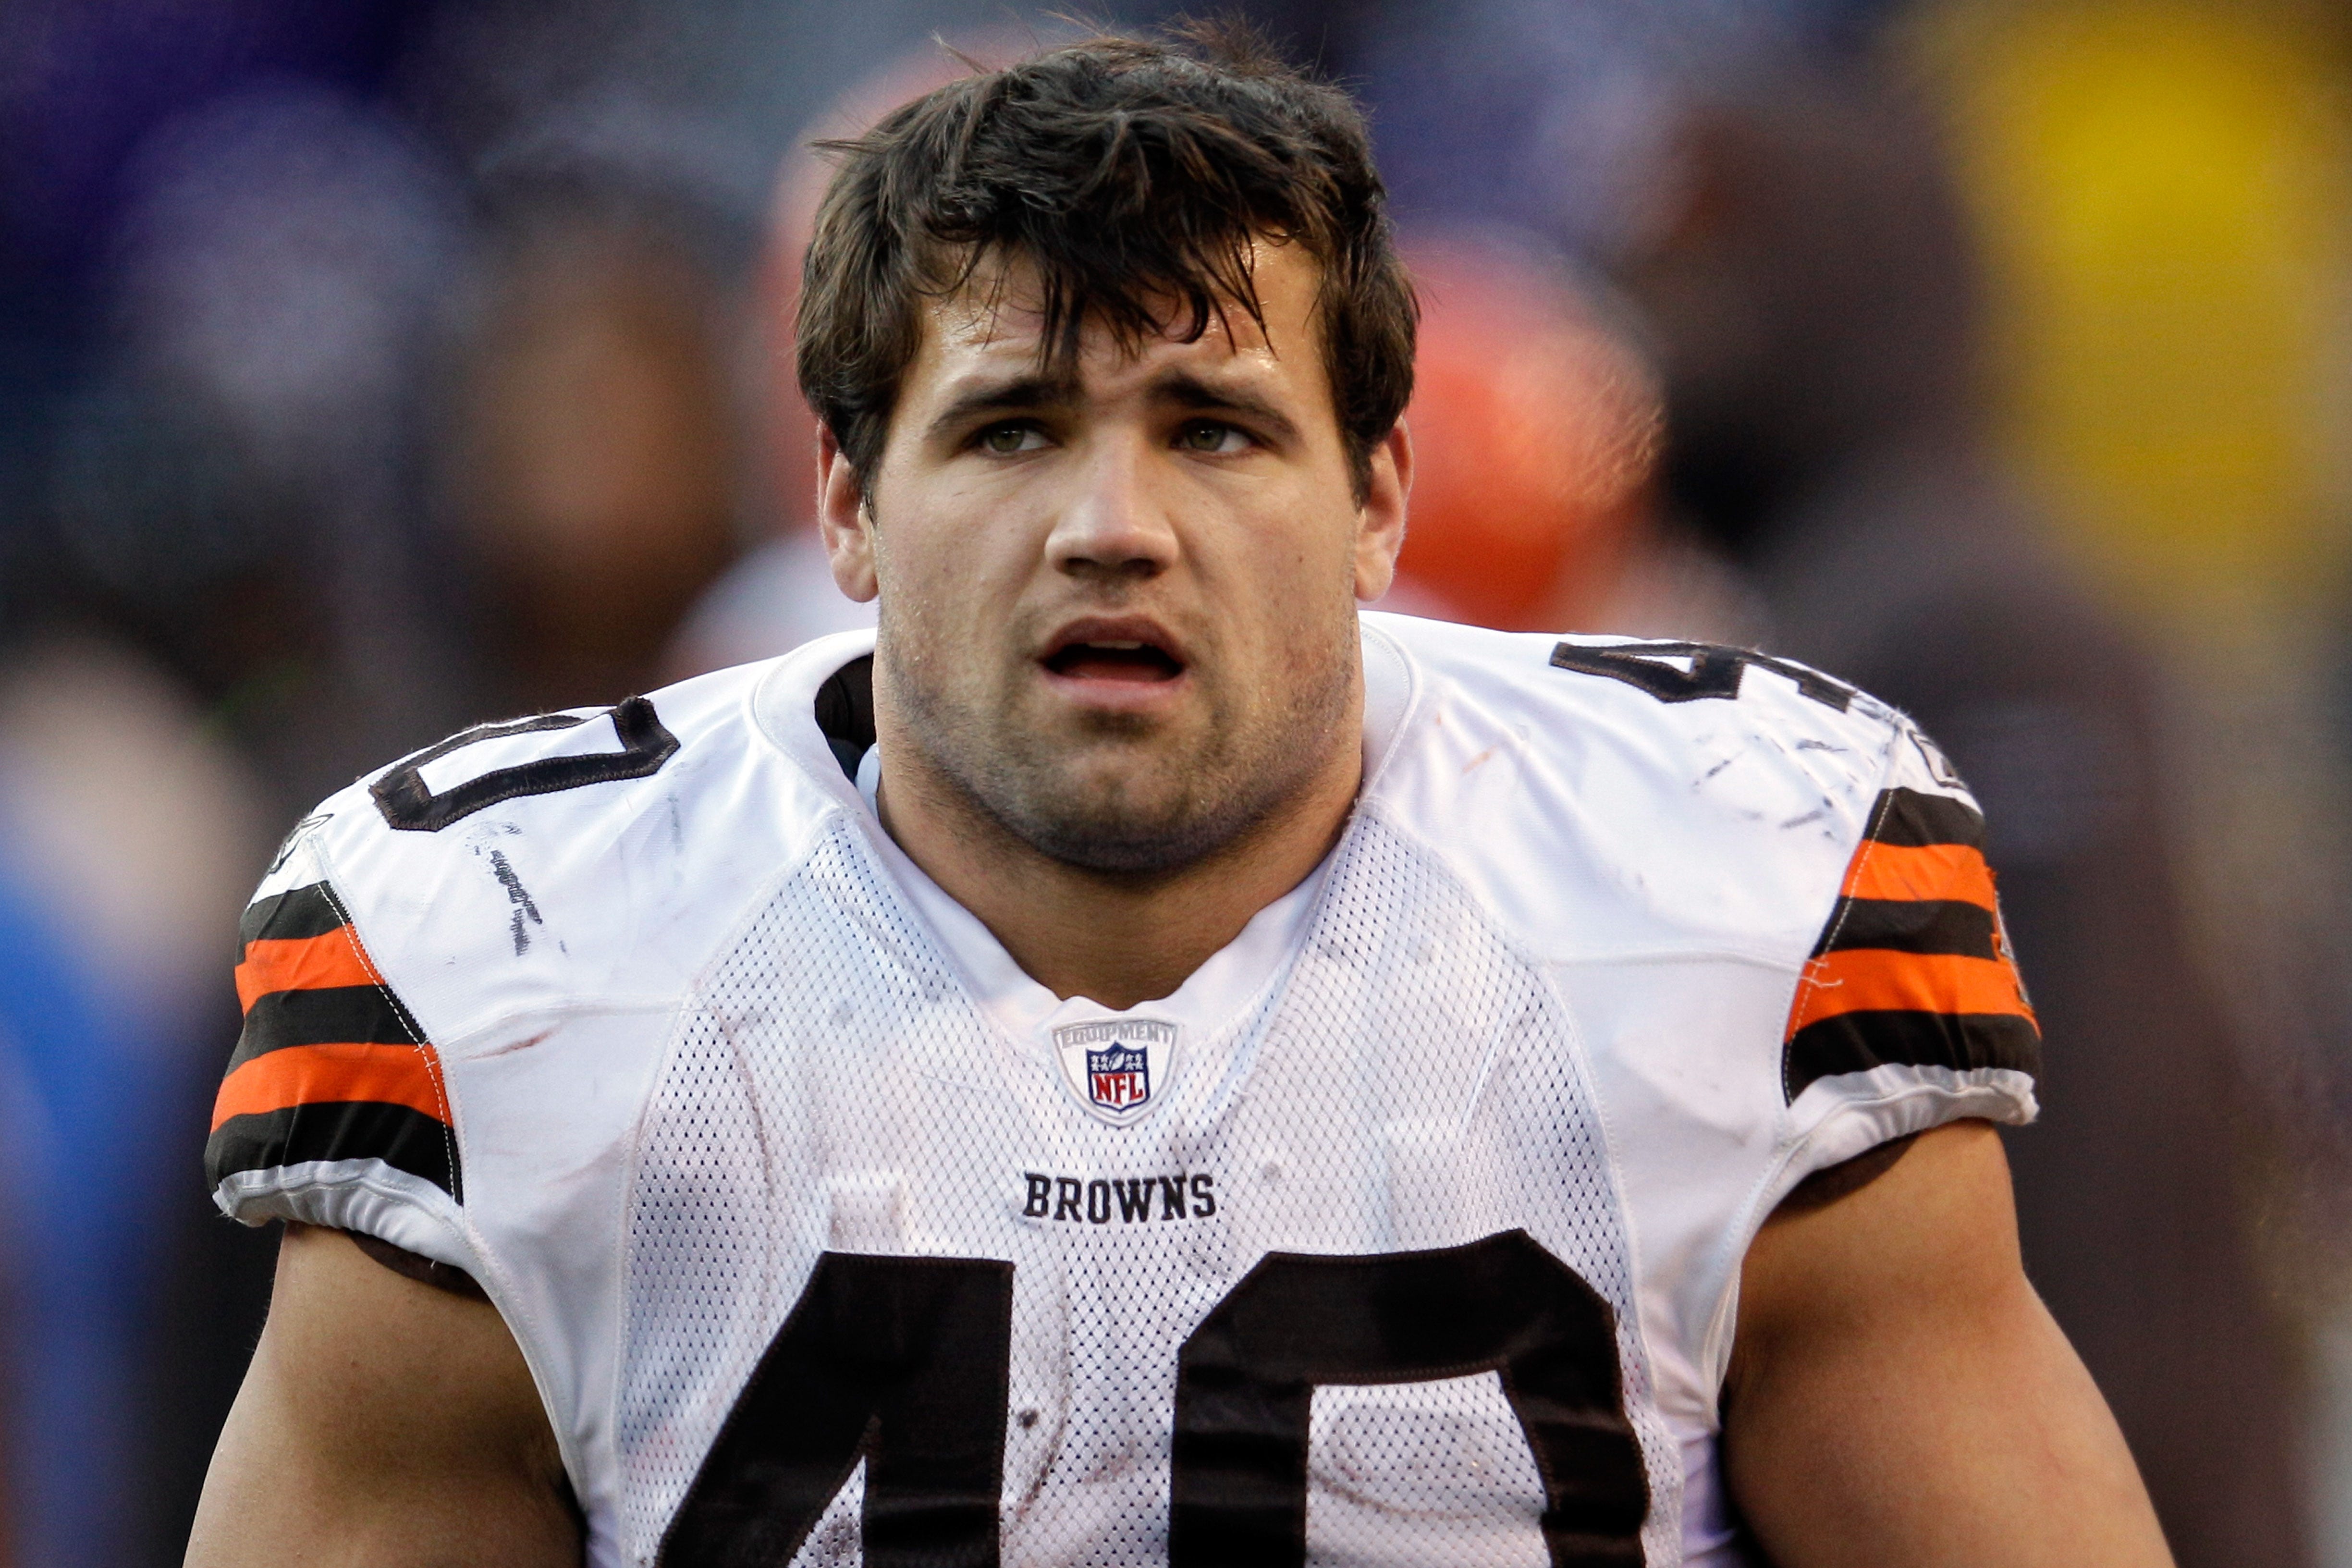 Peyton Hillis offers first details of near-death rescue in Florida surf